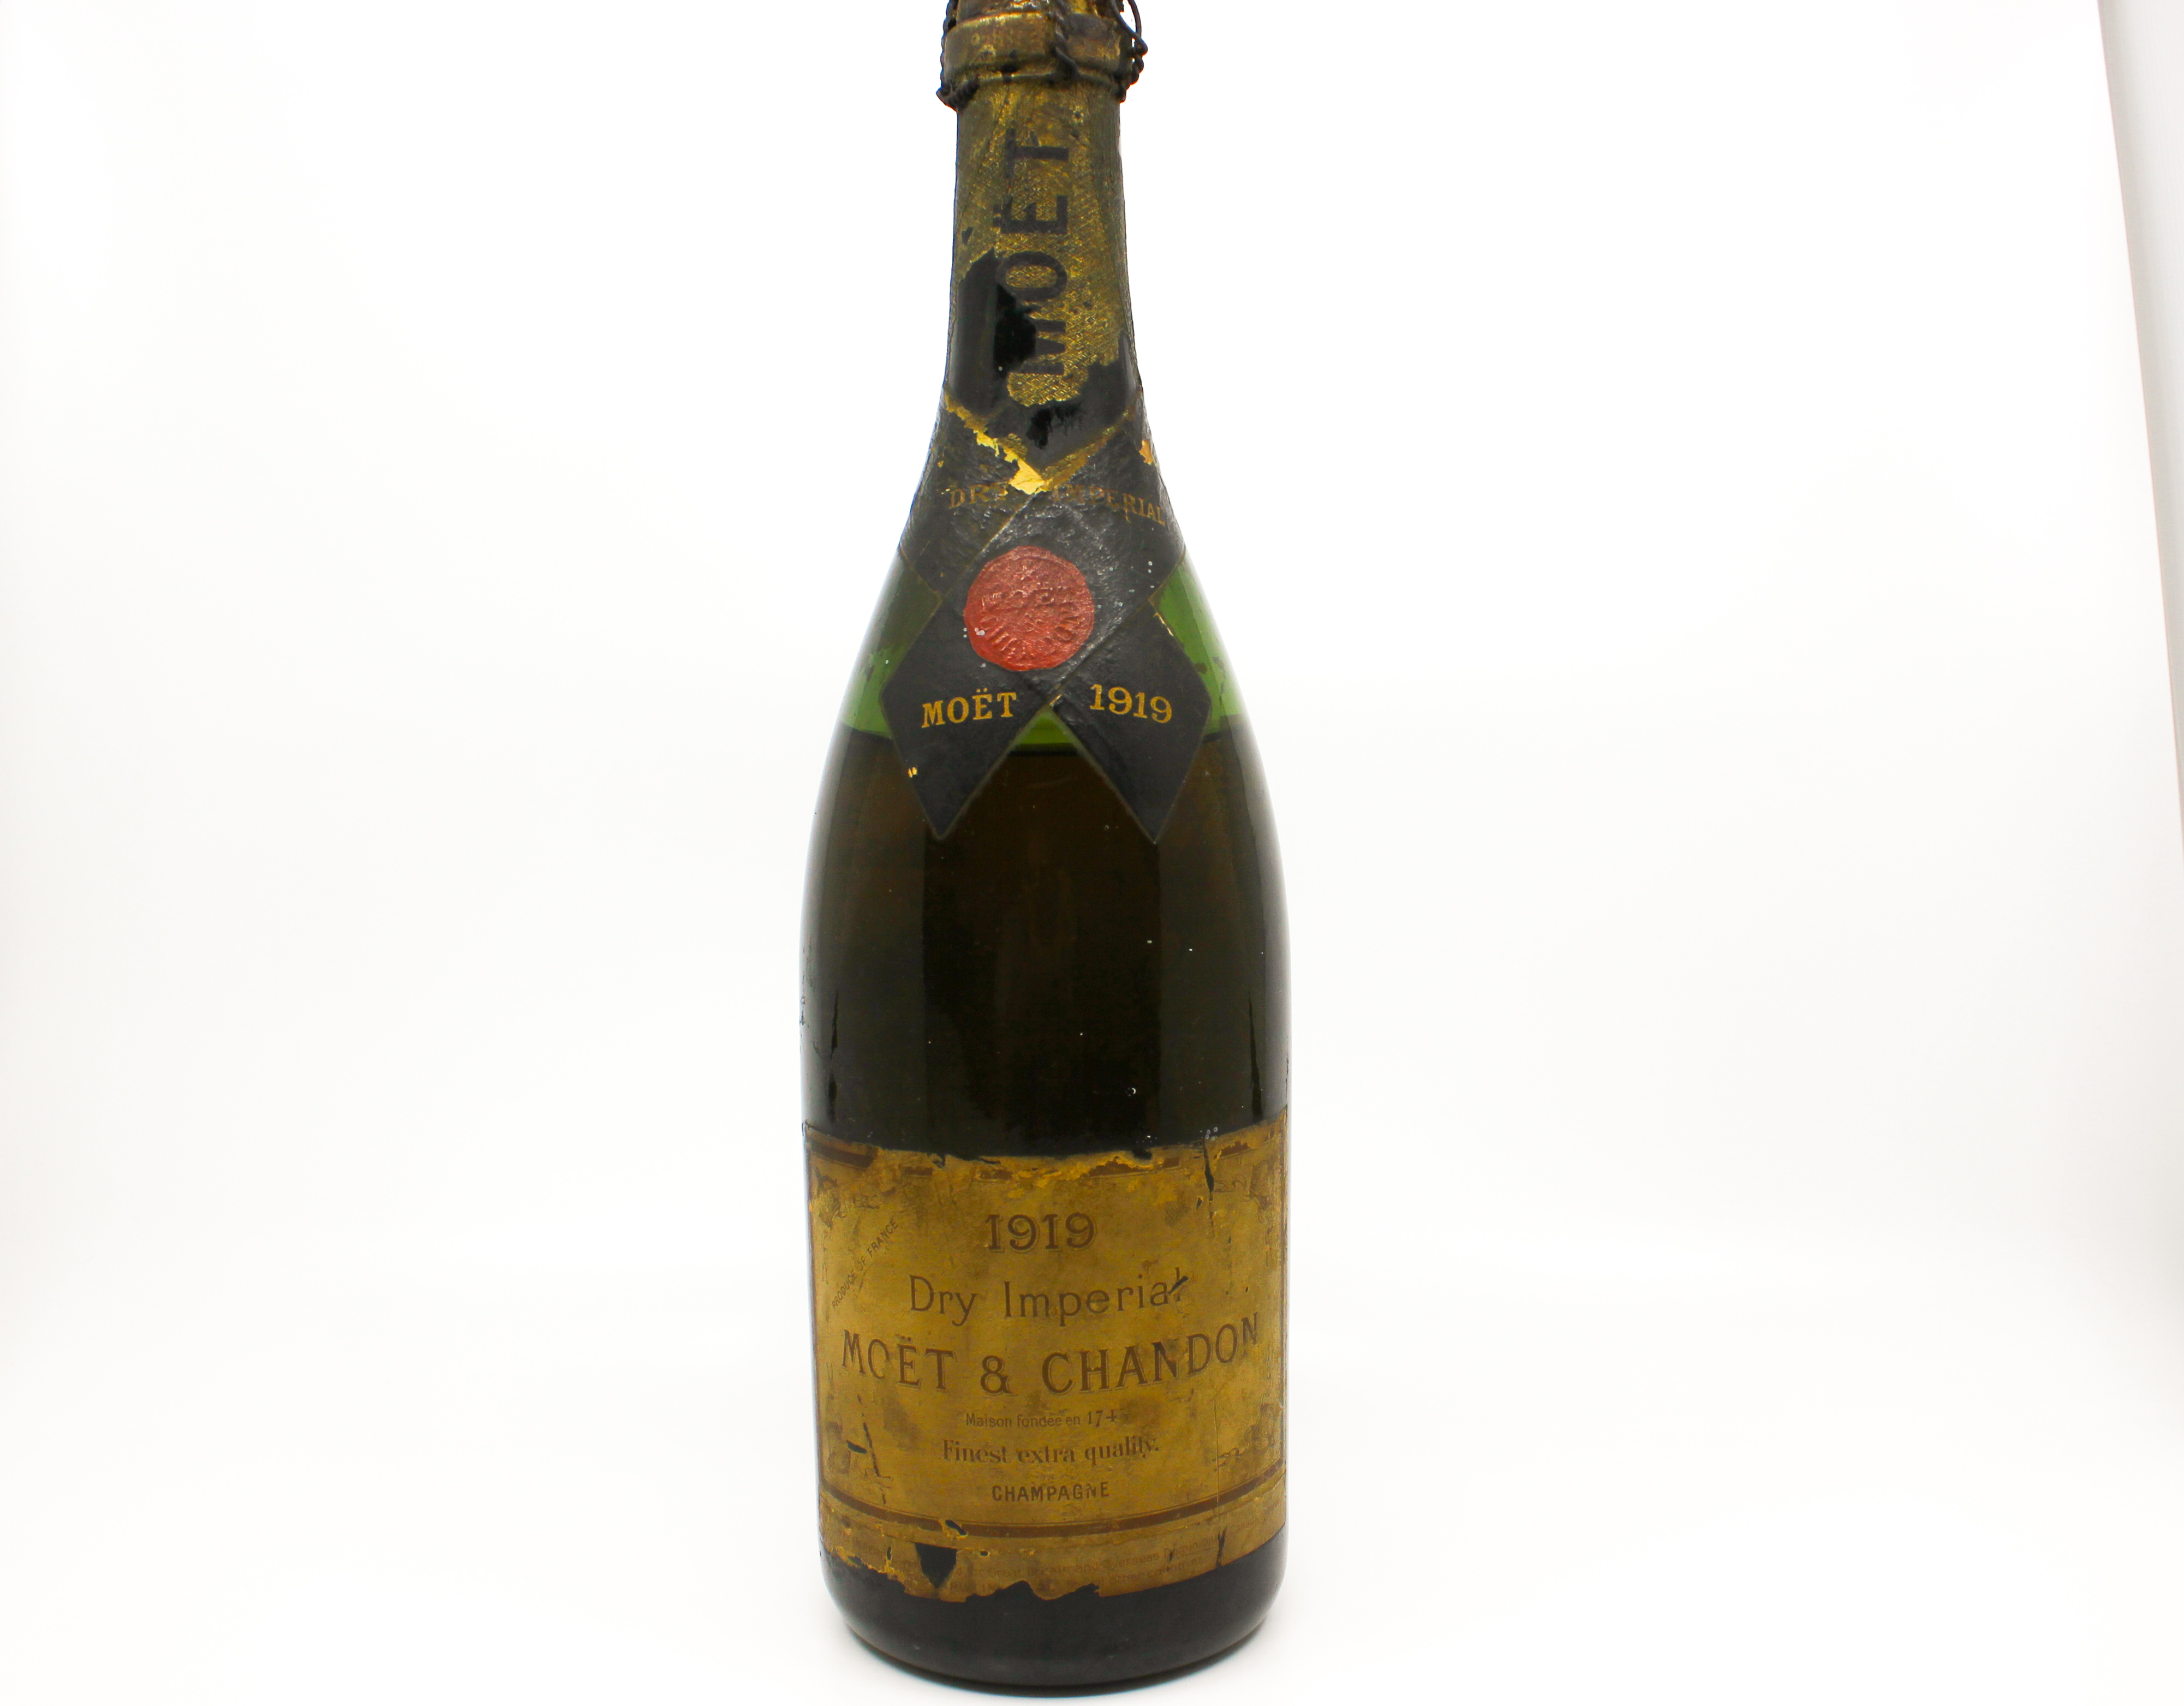 1919 Moët & Chandon Dry Imperial, Extremely Rare, Highly Collectible